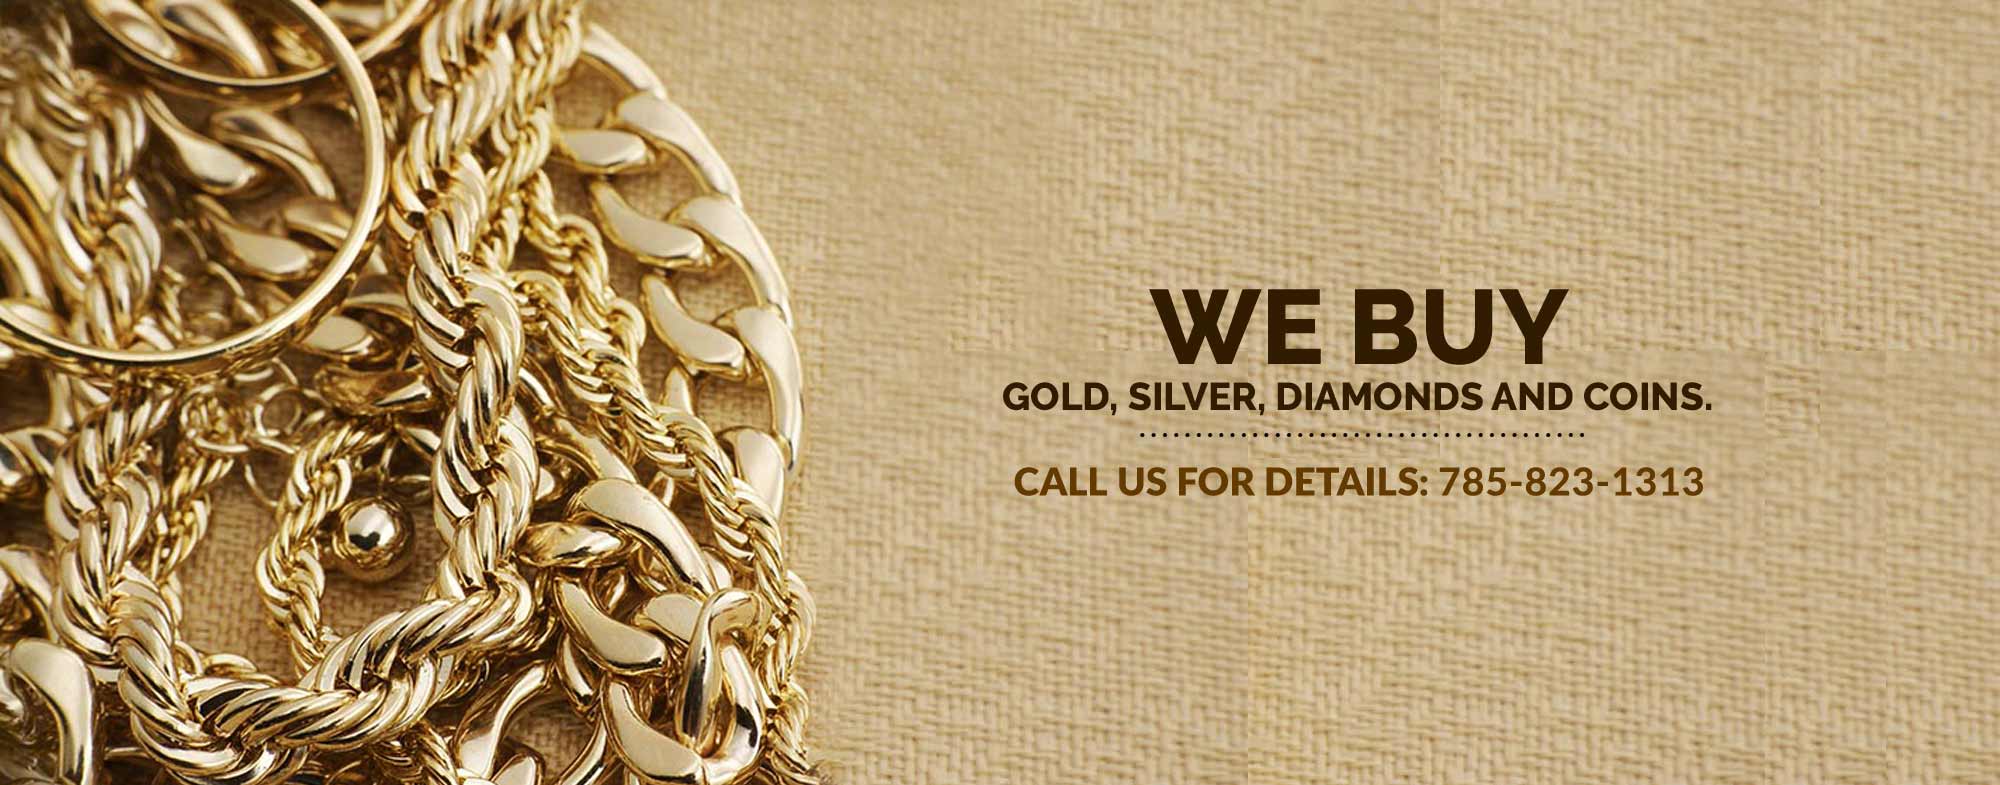 We Buy Gold at Showcase Jewelers